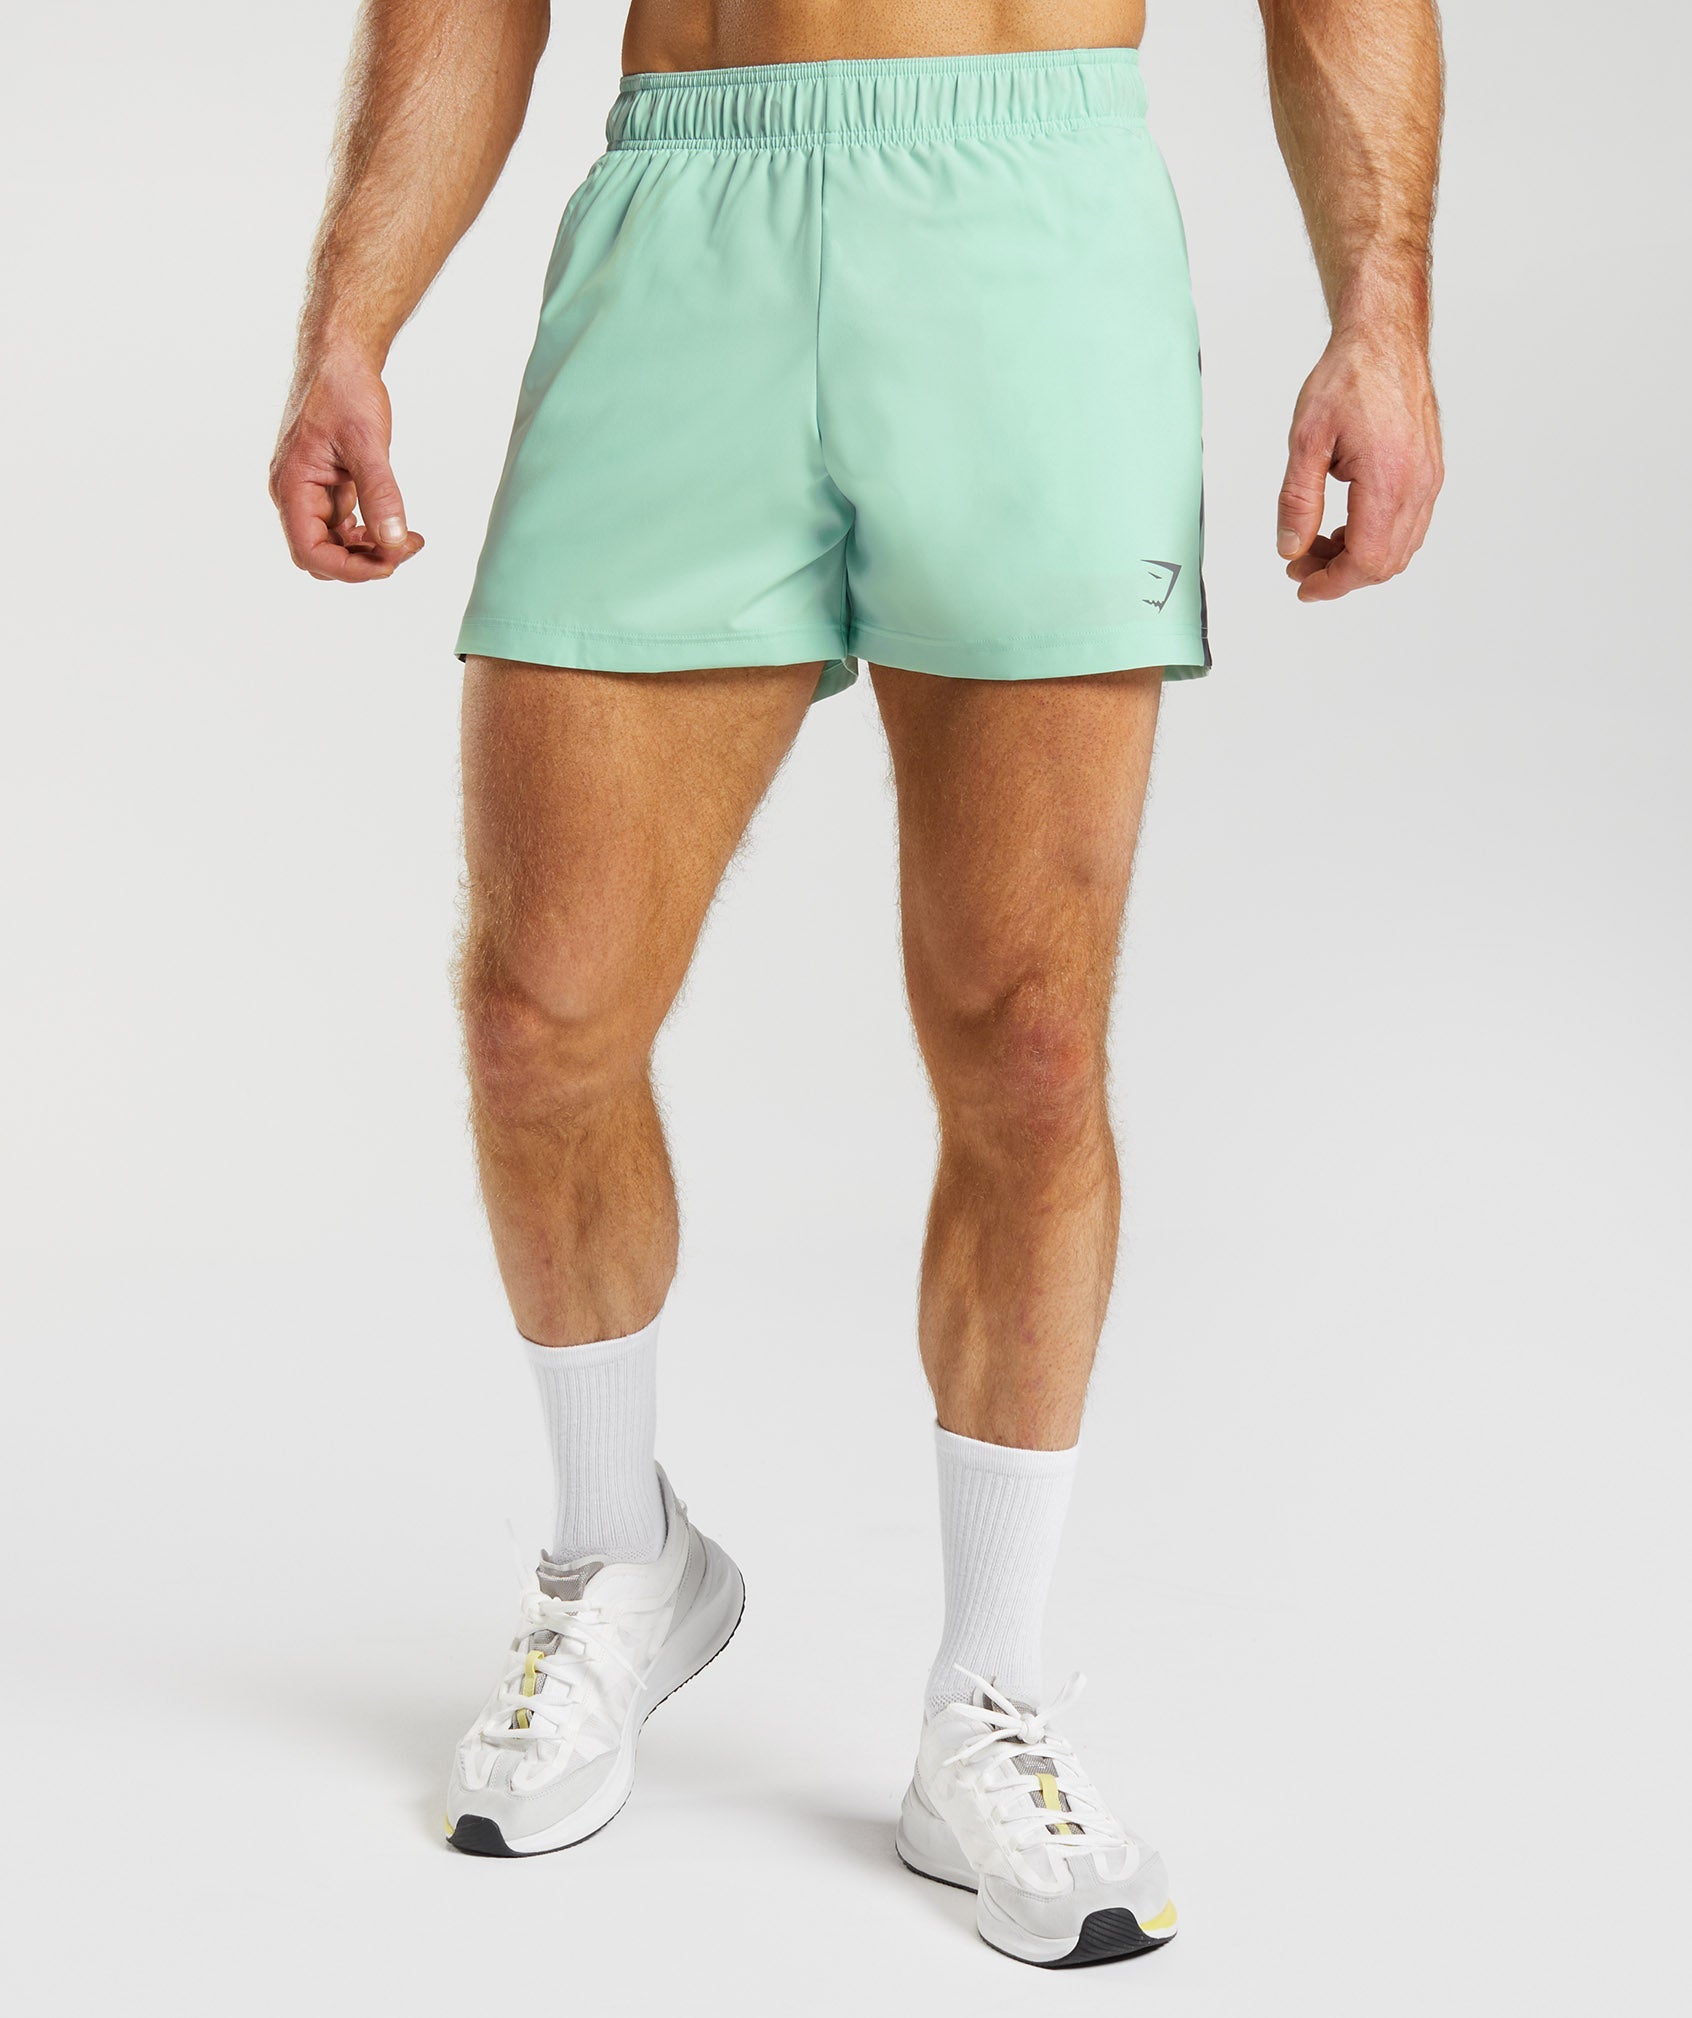 Sport 5" Shorts in Pastel Green/Silhouette Grey - view 1